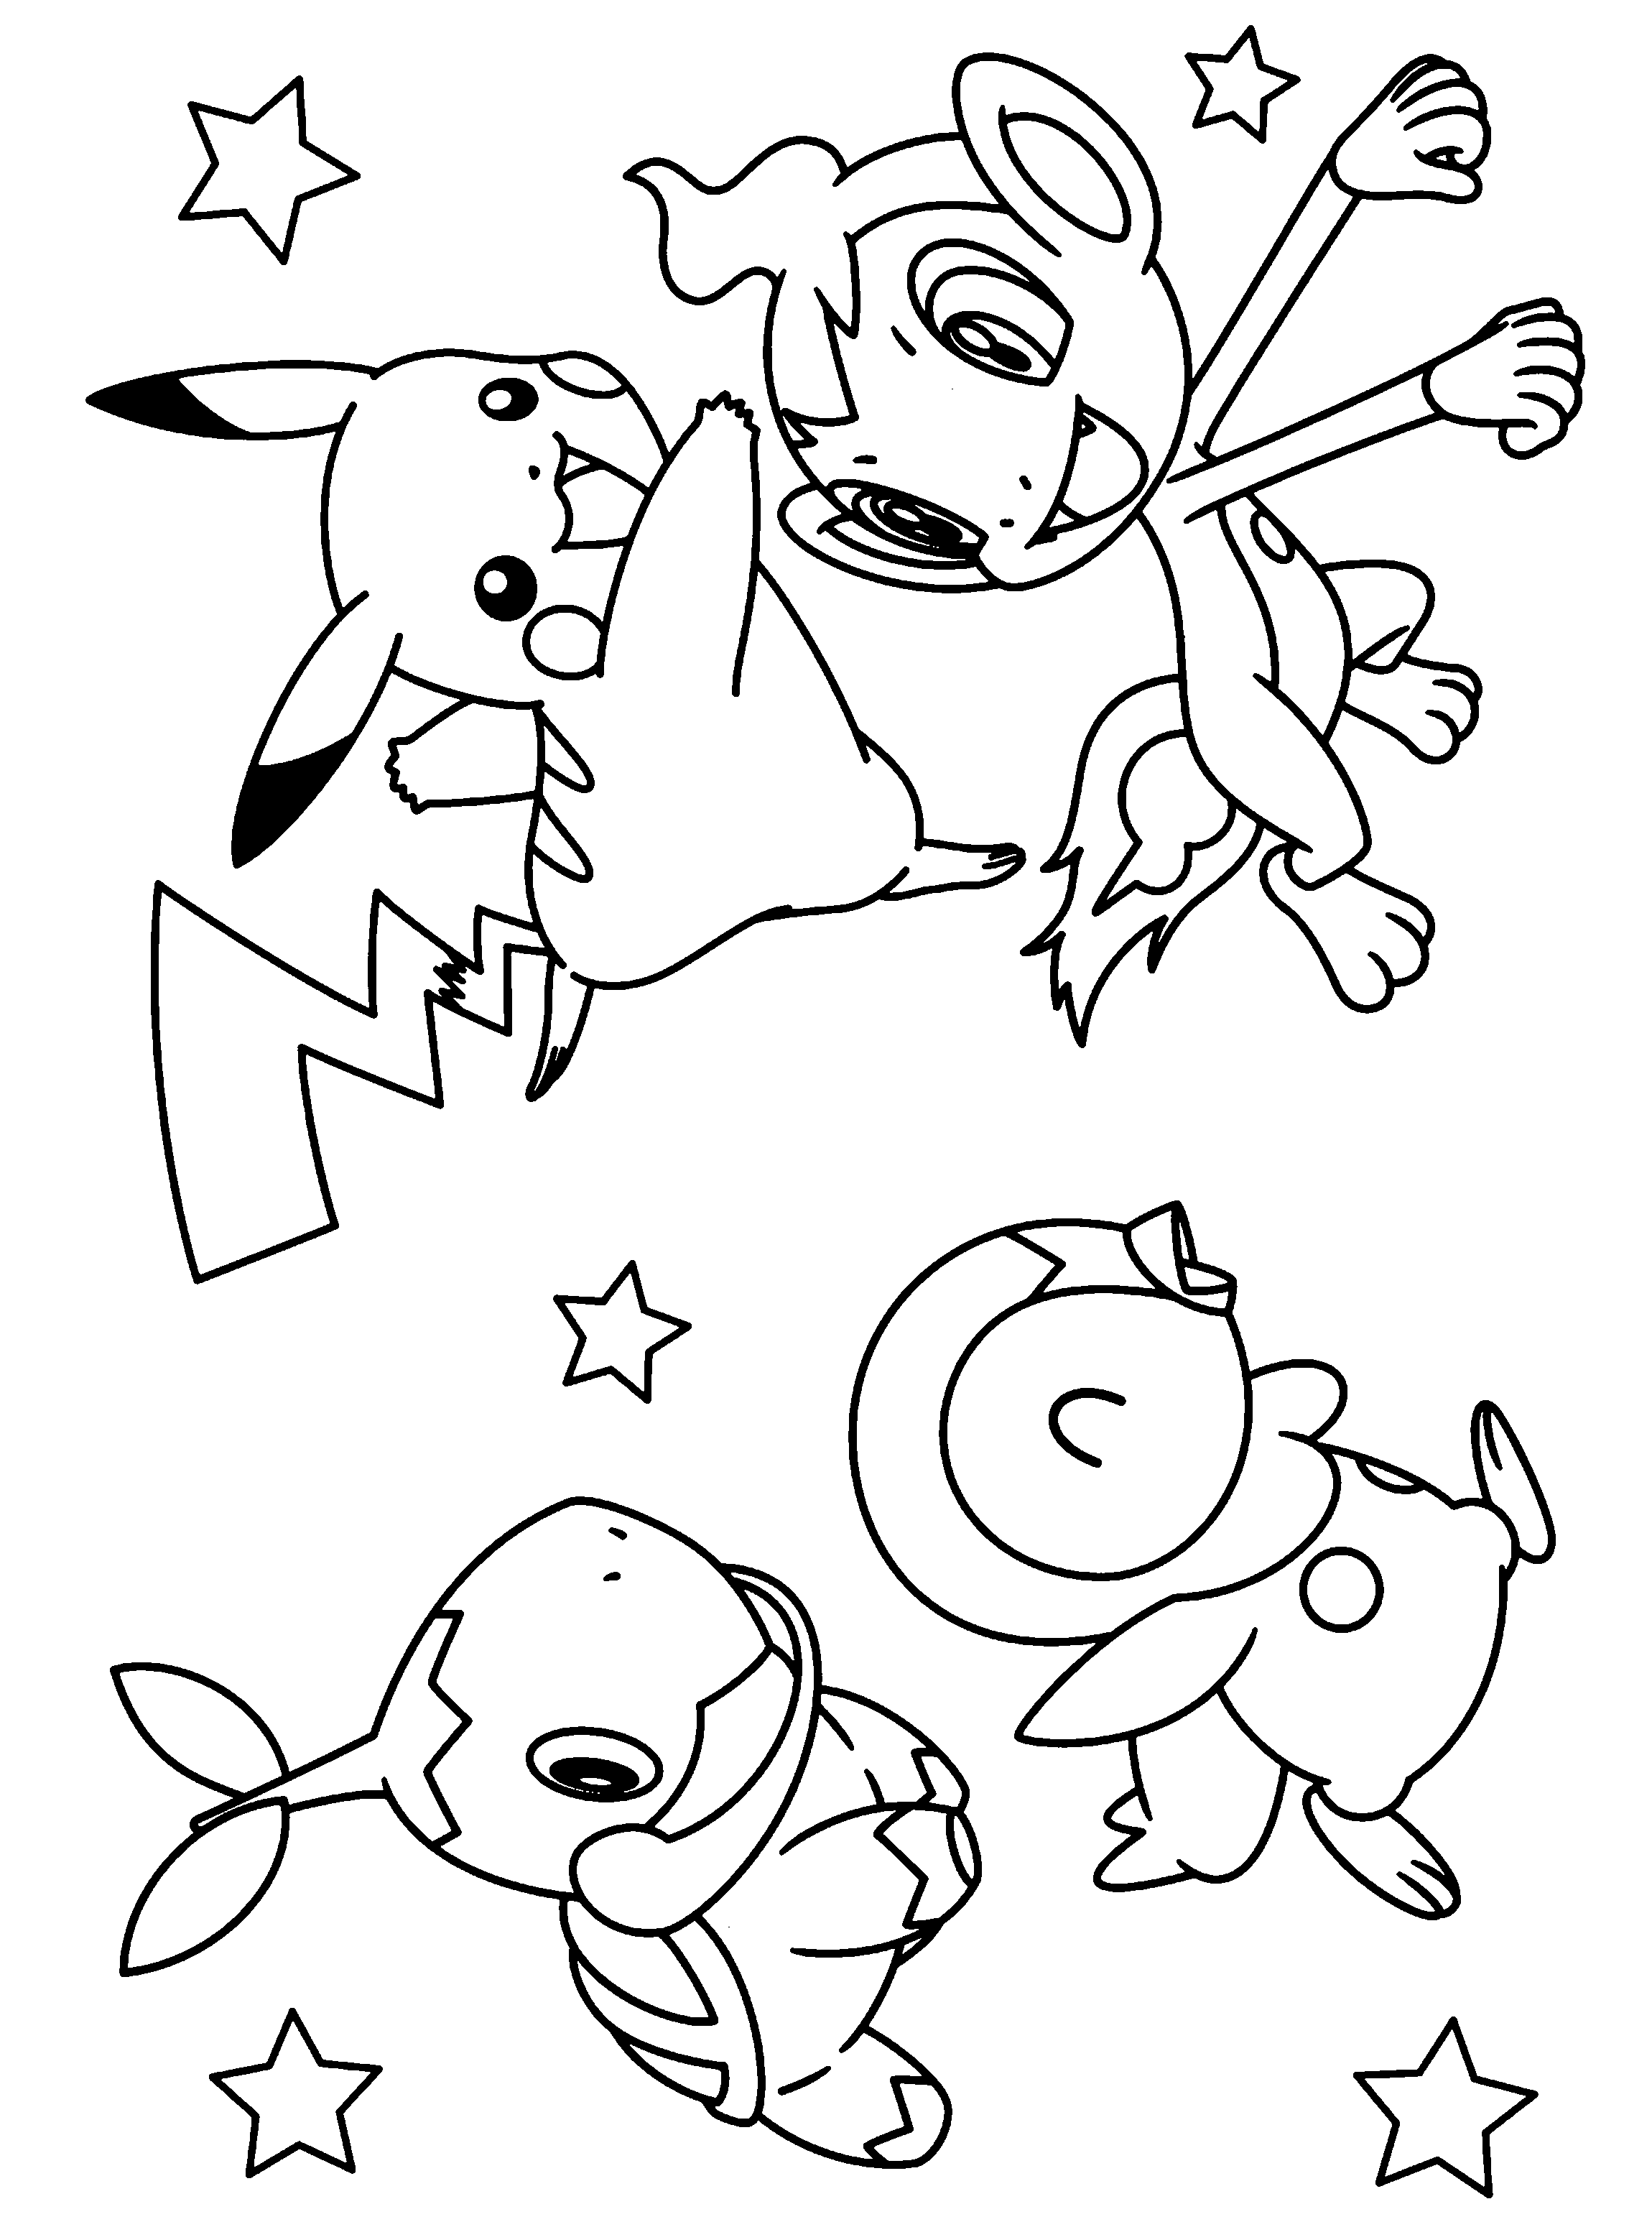 free-pokemon-group-coloring-pages-download-free-pokemon-group-coloring-pages-png-images-free